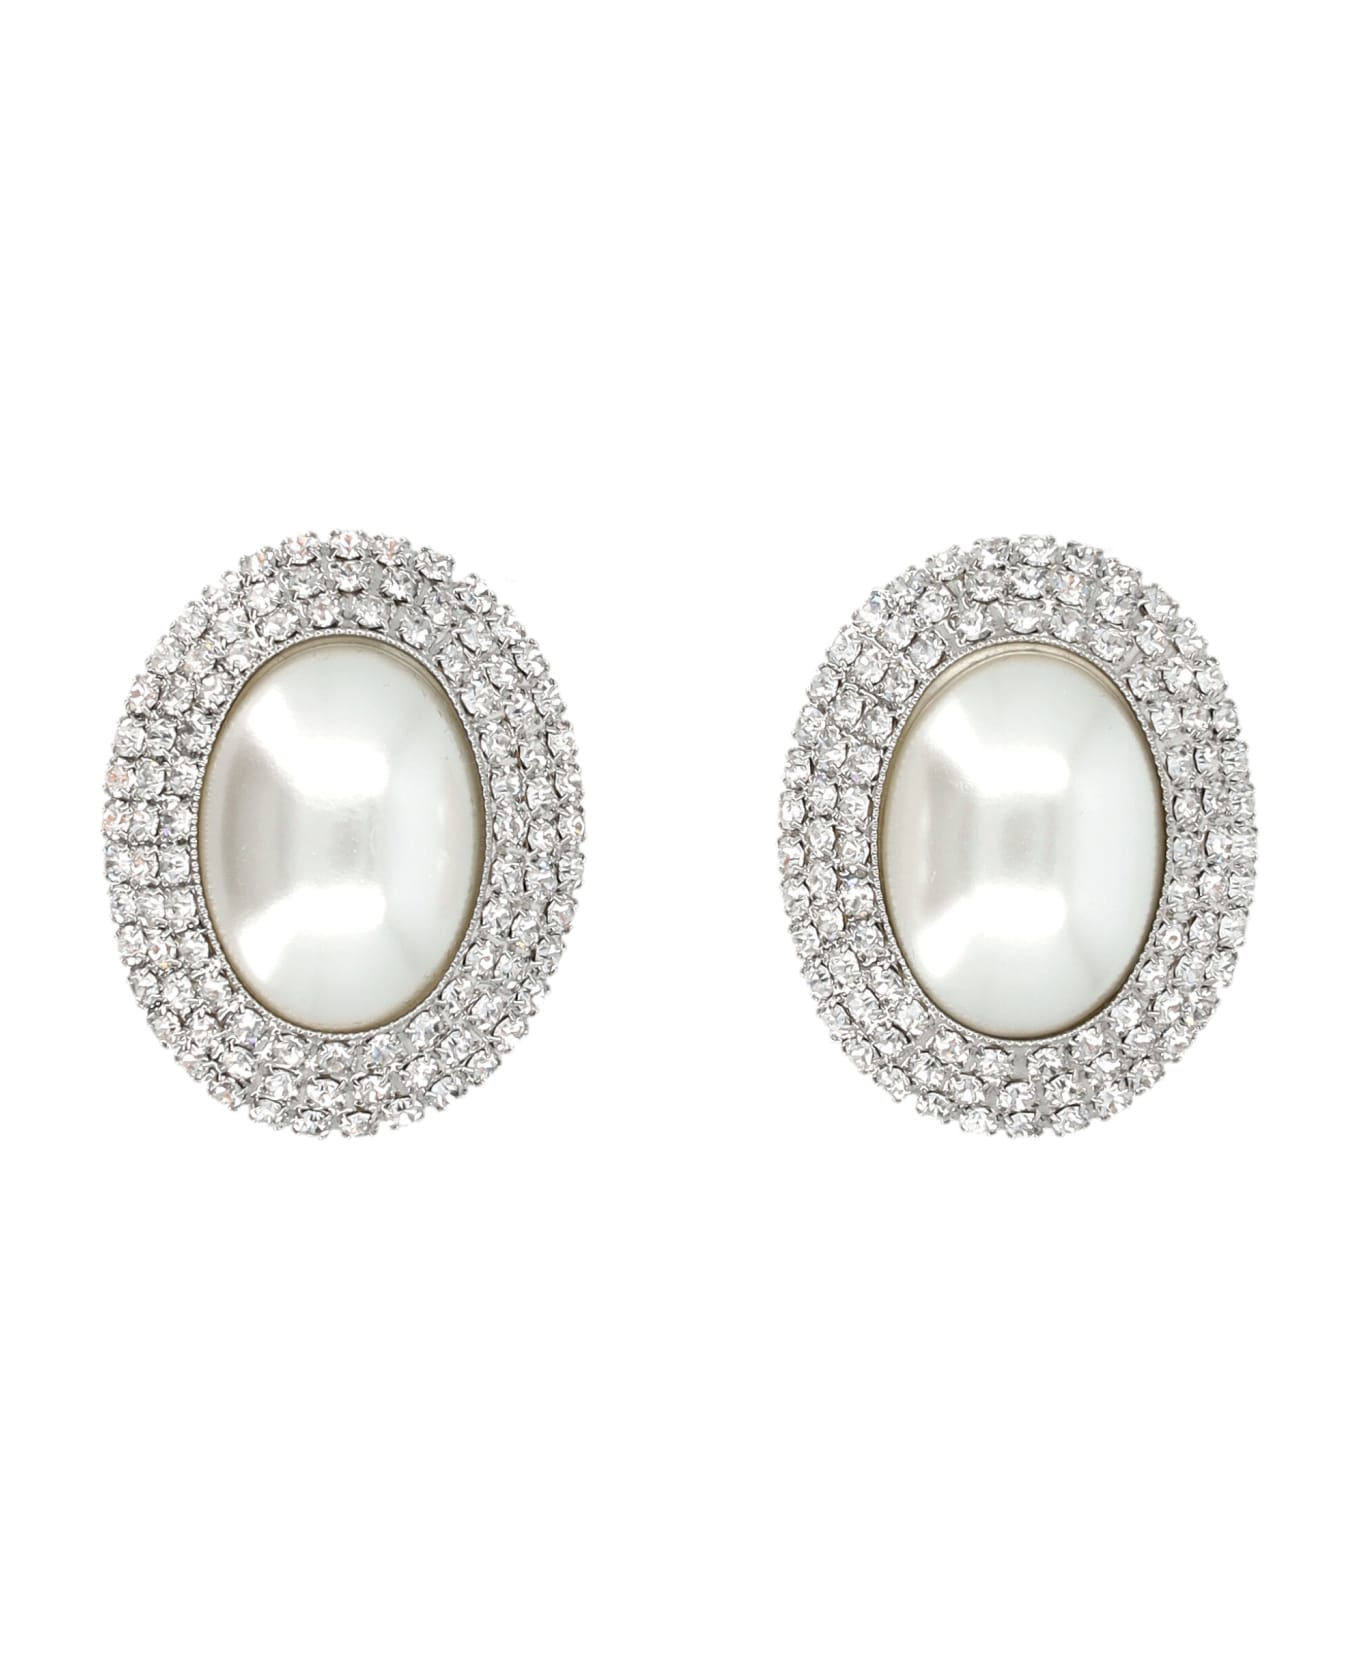 Alessandra Rich Oval With Pearl Earrings - SILVER CRYSTAL イヤリング